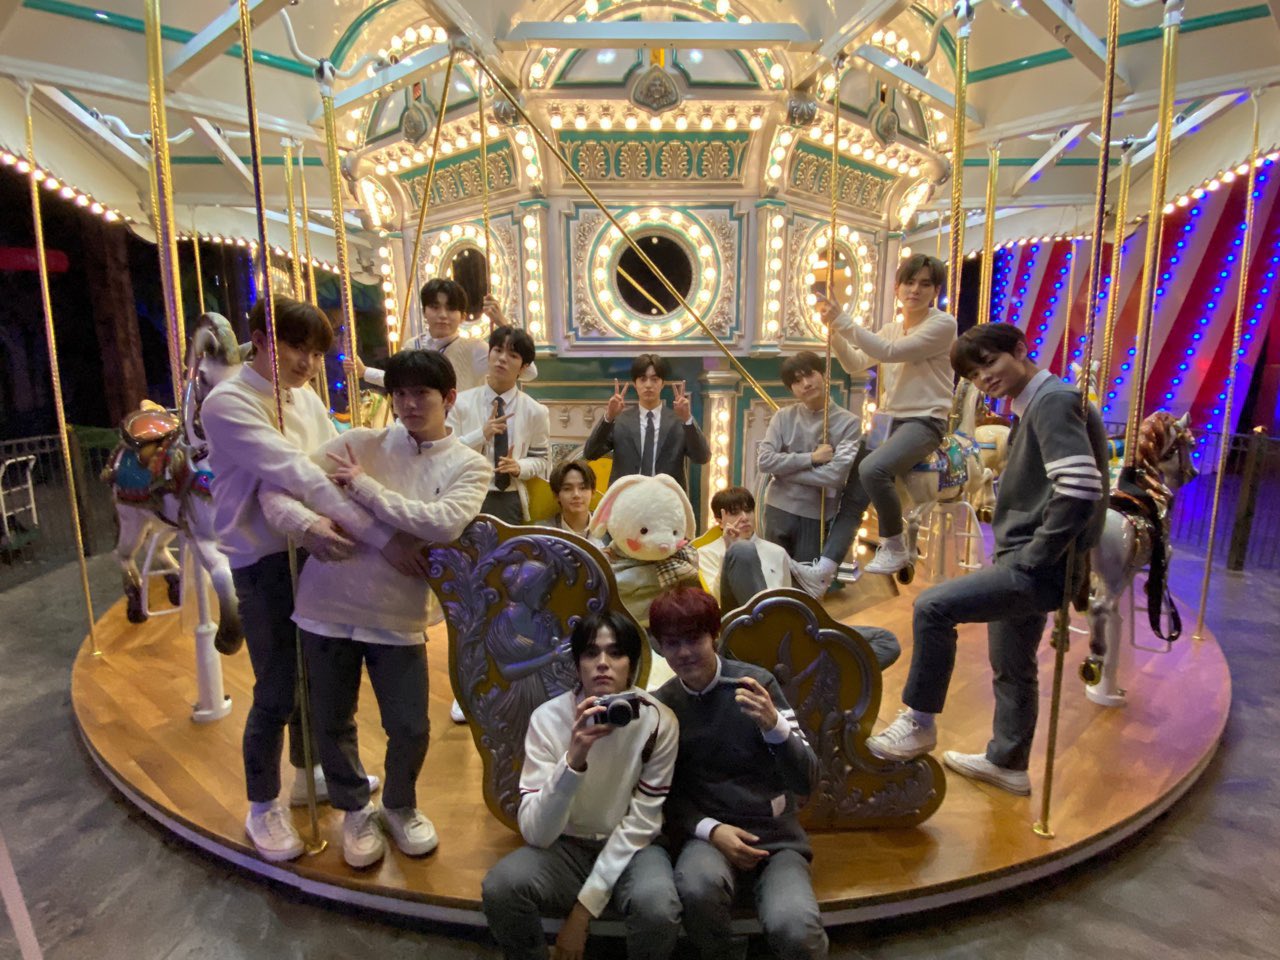 TREASURE, a surprise gift for the fan song 'EVERYDAY' for the 1st anniversary of their debut